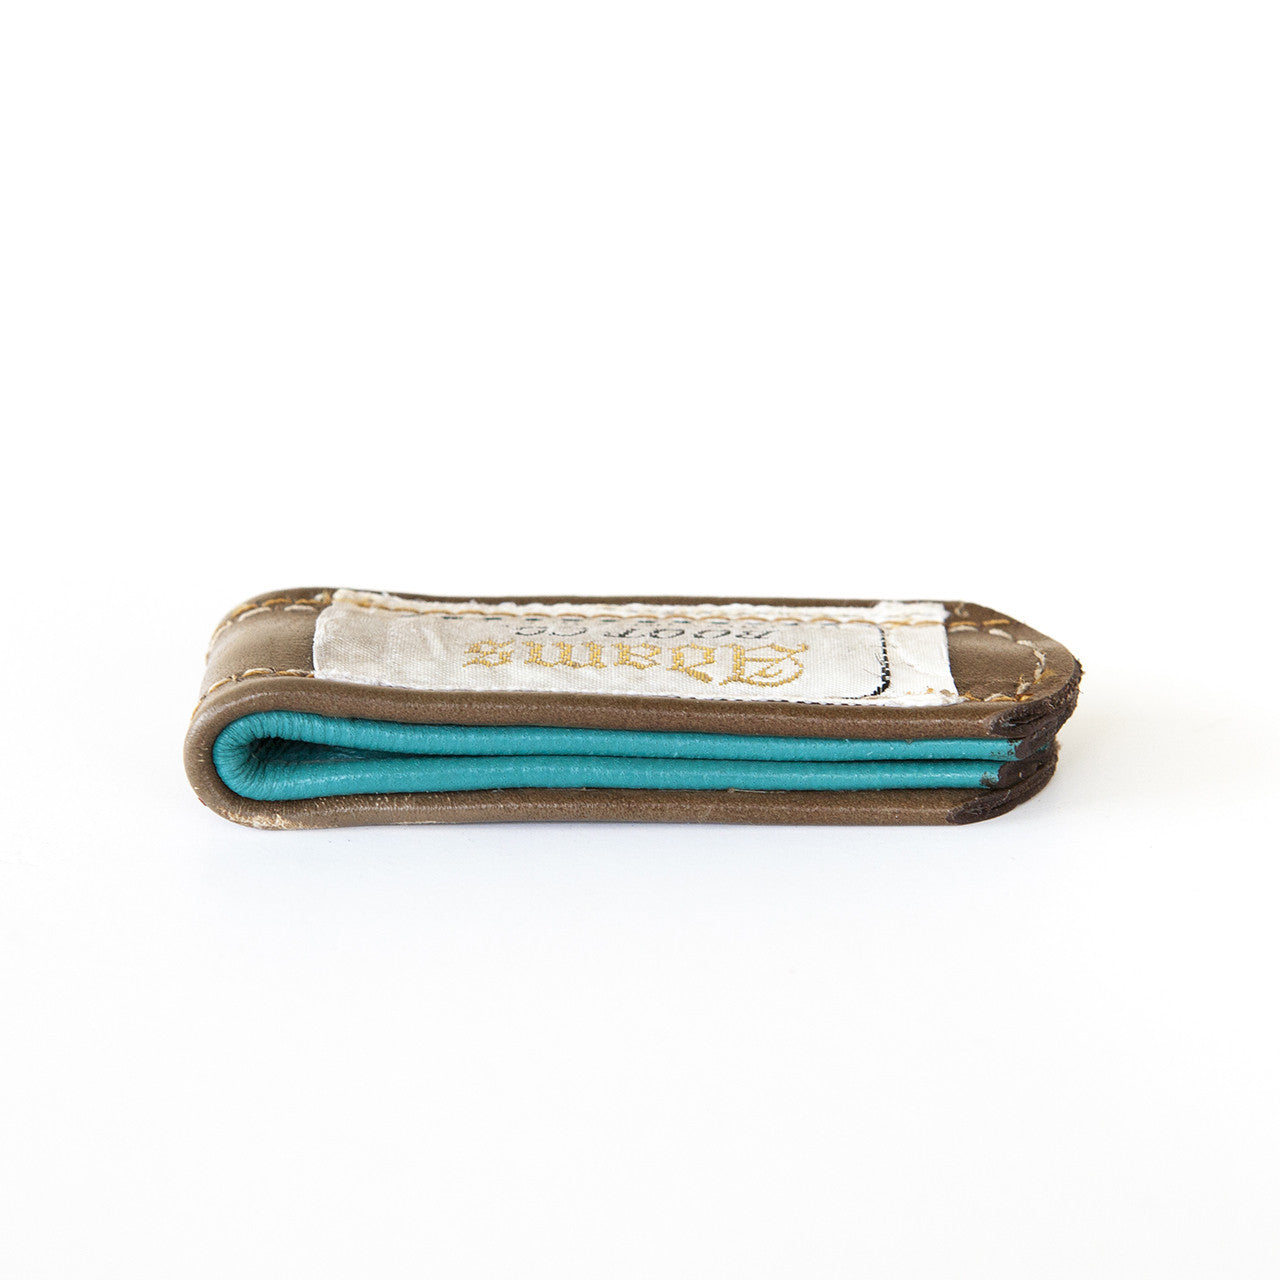 Brown + Turquoise Bootstrap Money Clip